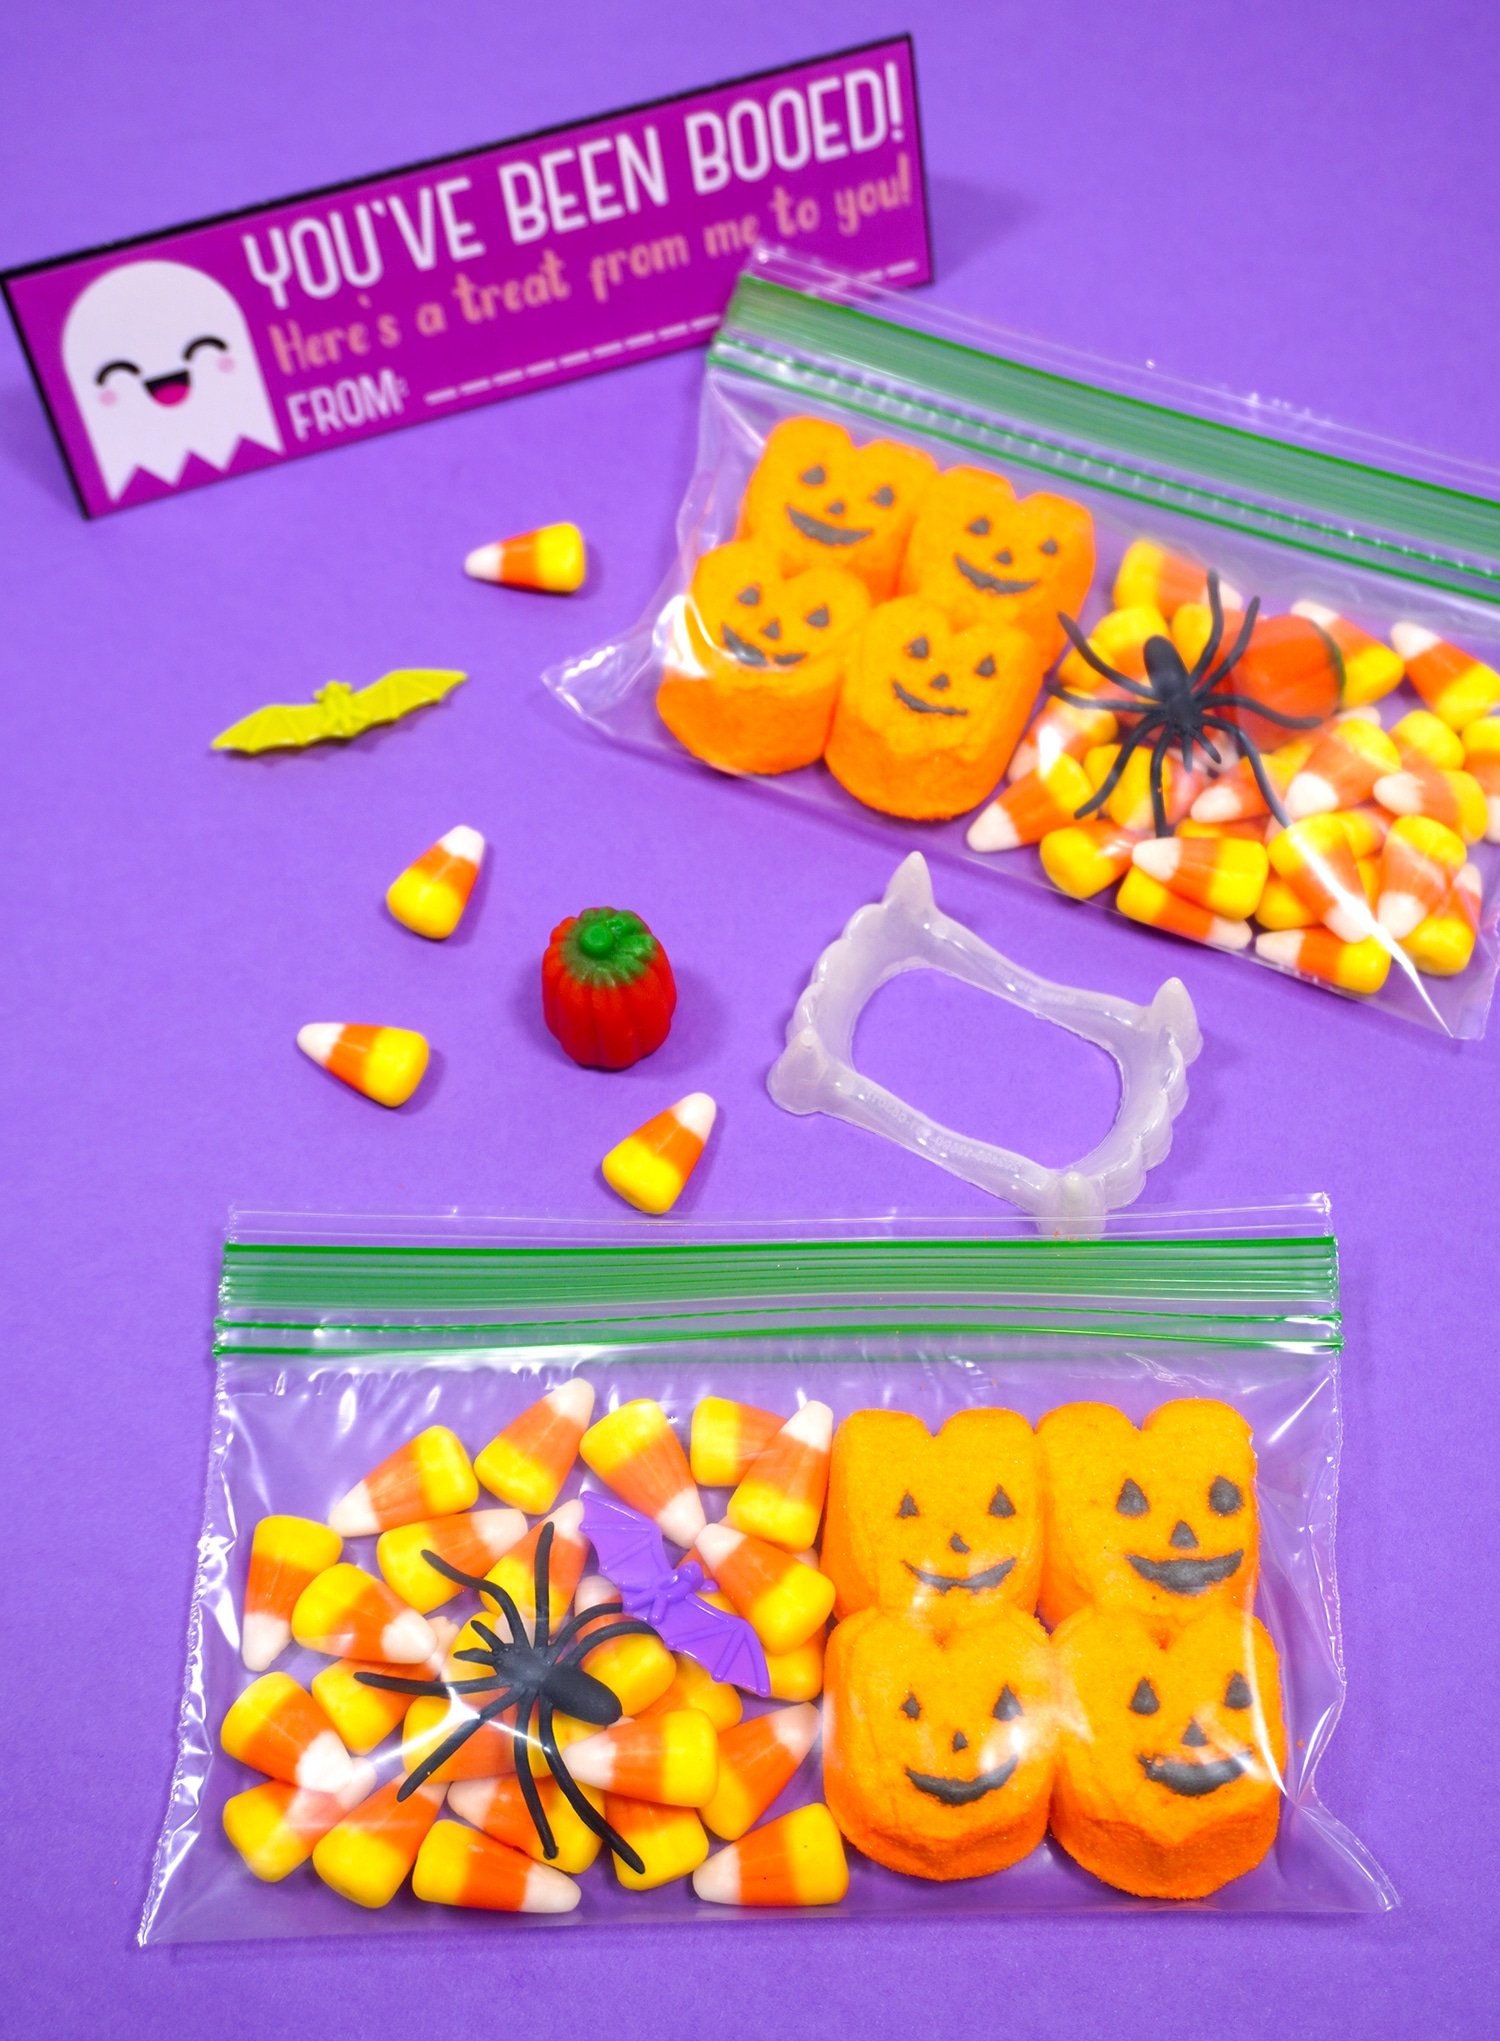 bags now filled with treats pictured with candy and printable